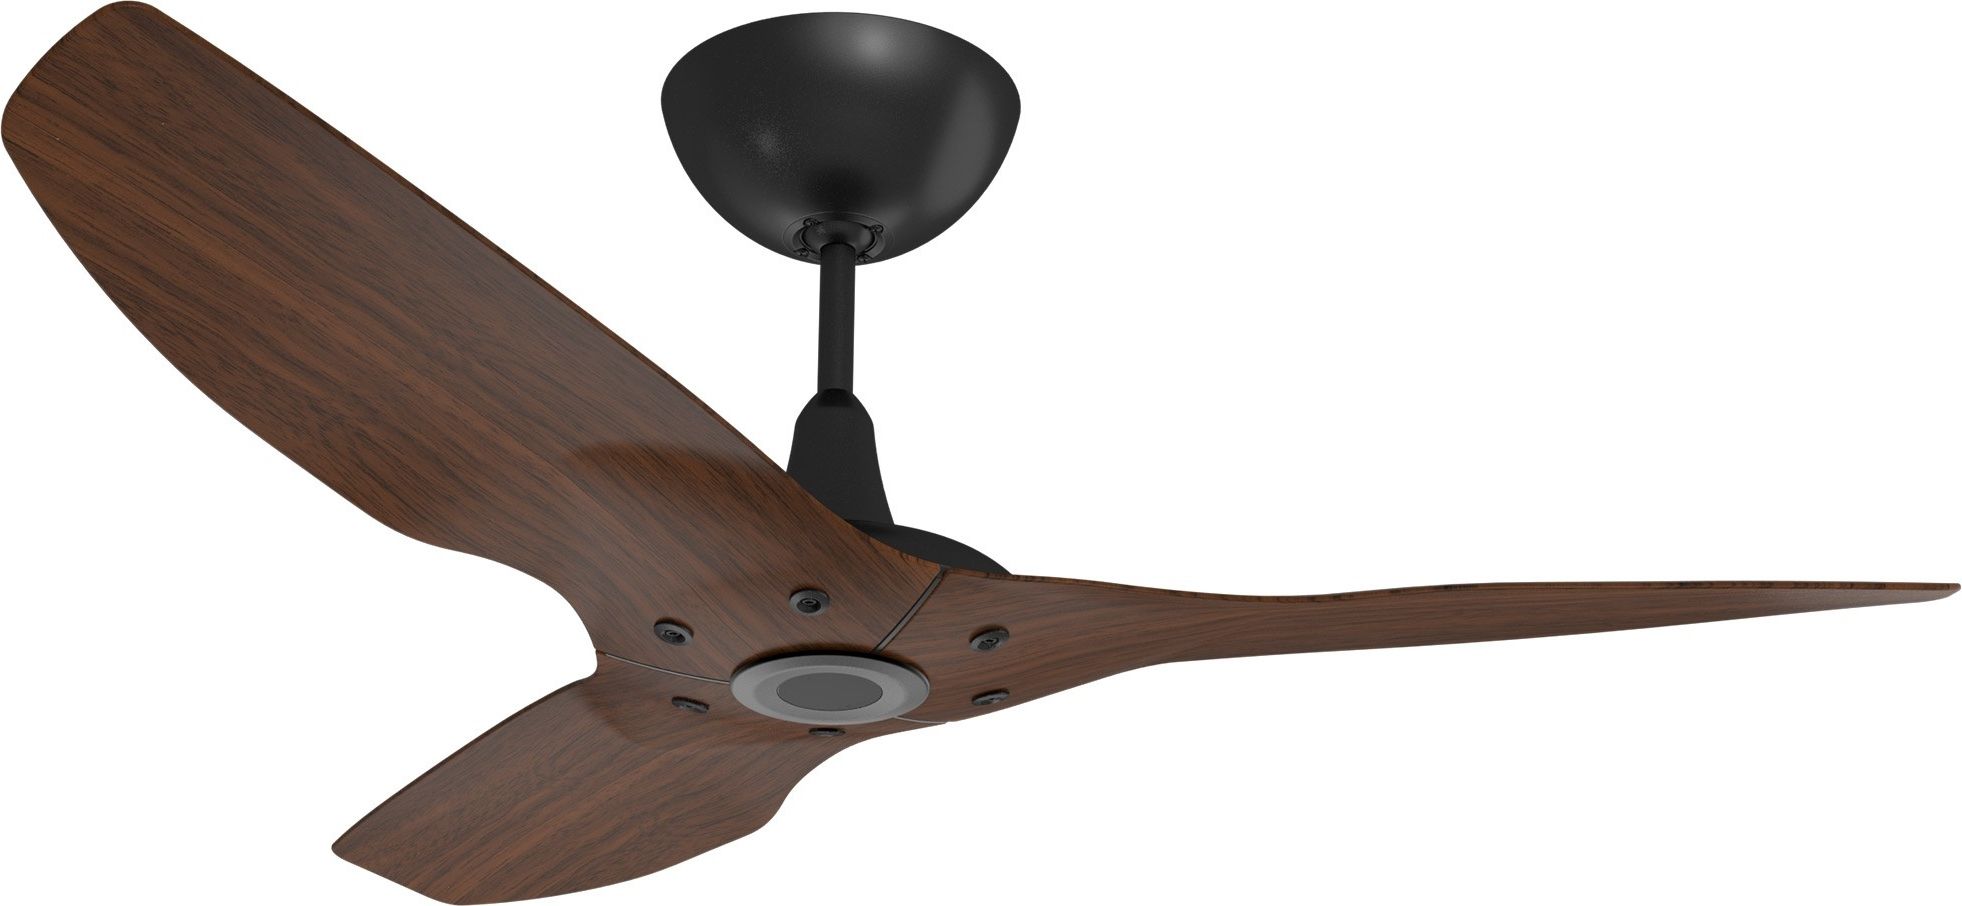 High End Outdoor Ceiling Fans Intended For Newest Haiku Outdoor Ceiling Fan: 52", Cocoa Woodgrain Aluminum, Universal (View 3 of 20)